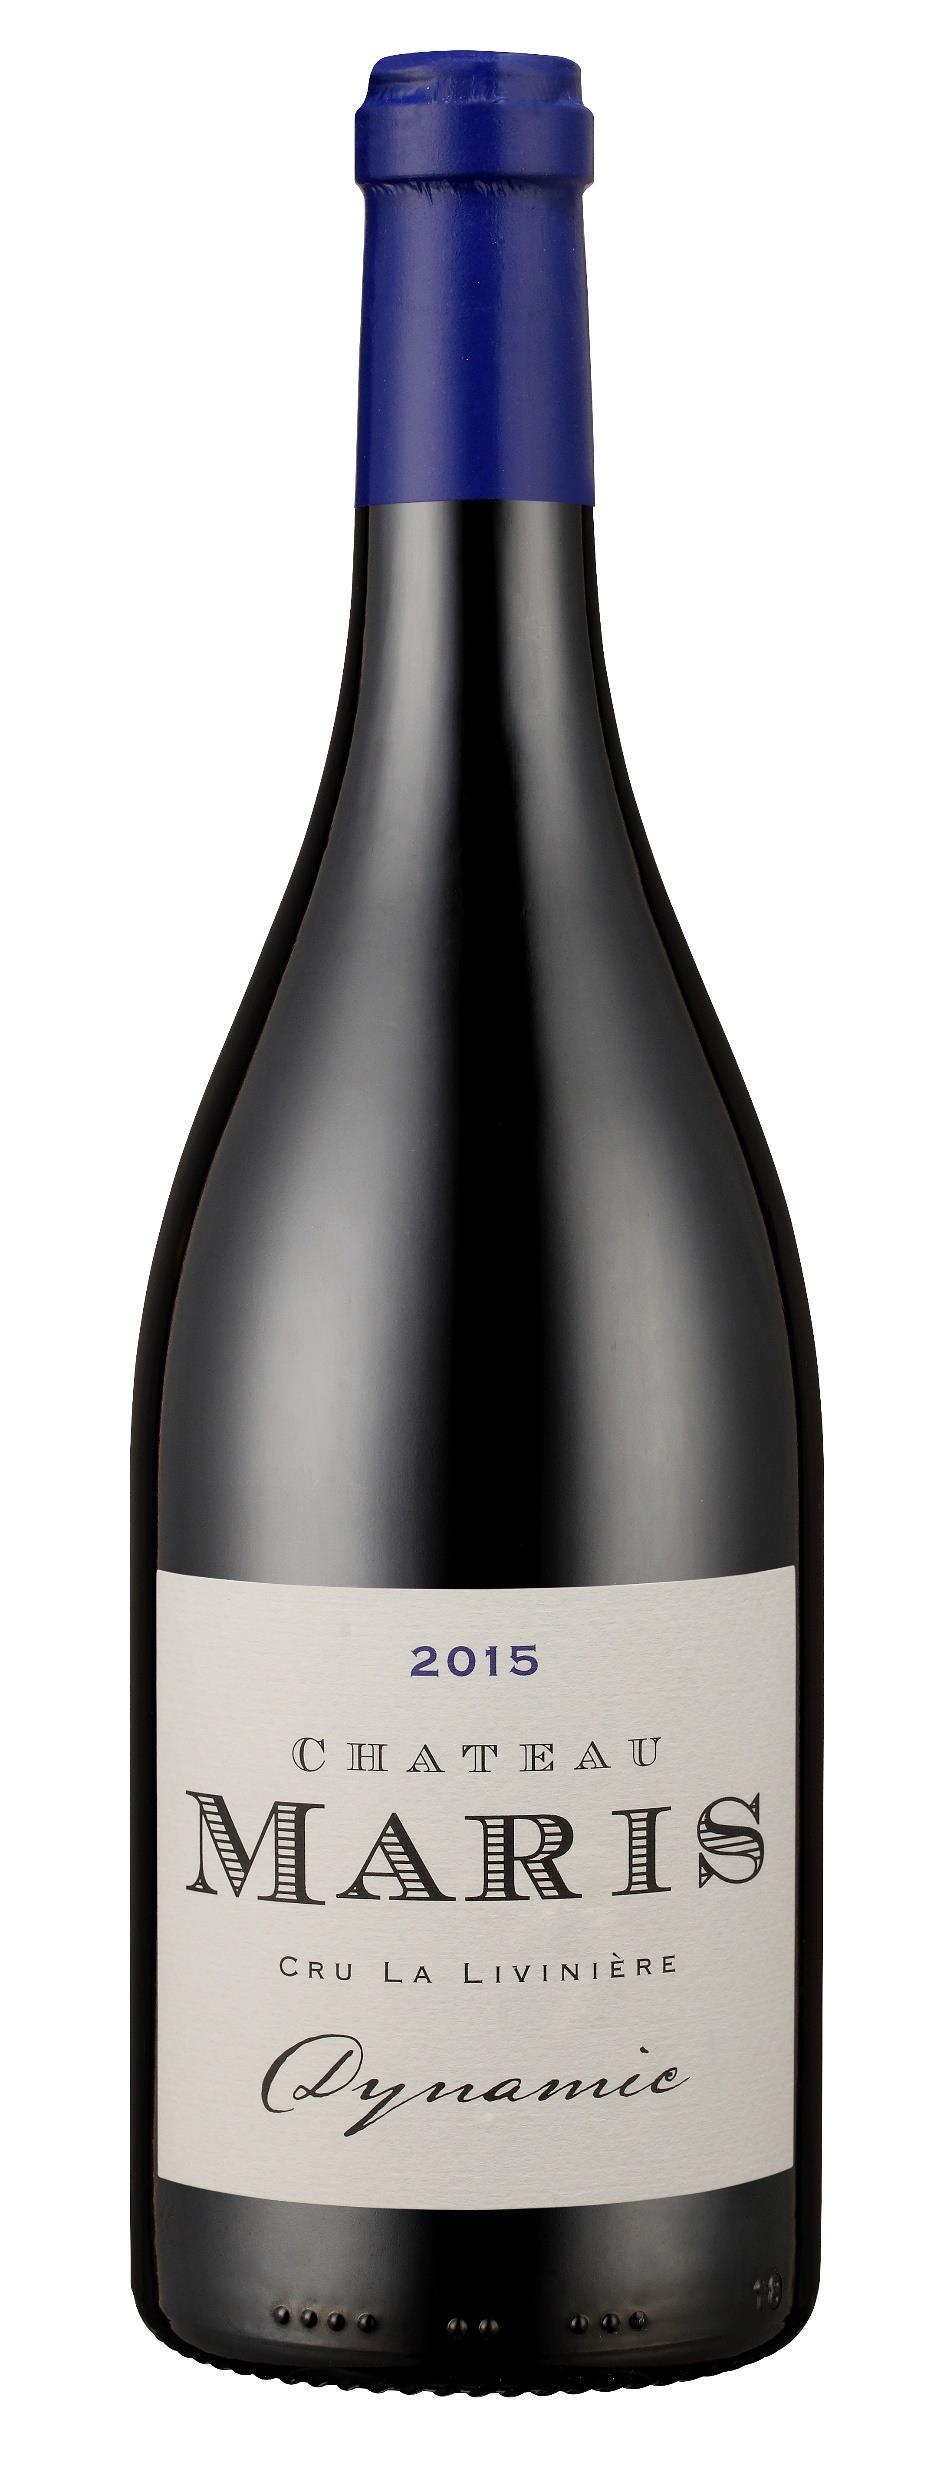 Dynamic 2015 is a Syrah from our best vines in La Livinière. This wine is from a parcel of 0,7Ha with a soil of clay, limestone and sandstone.